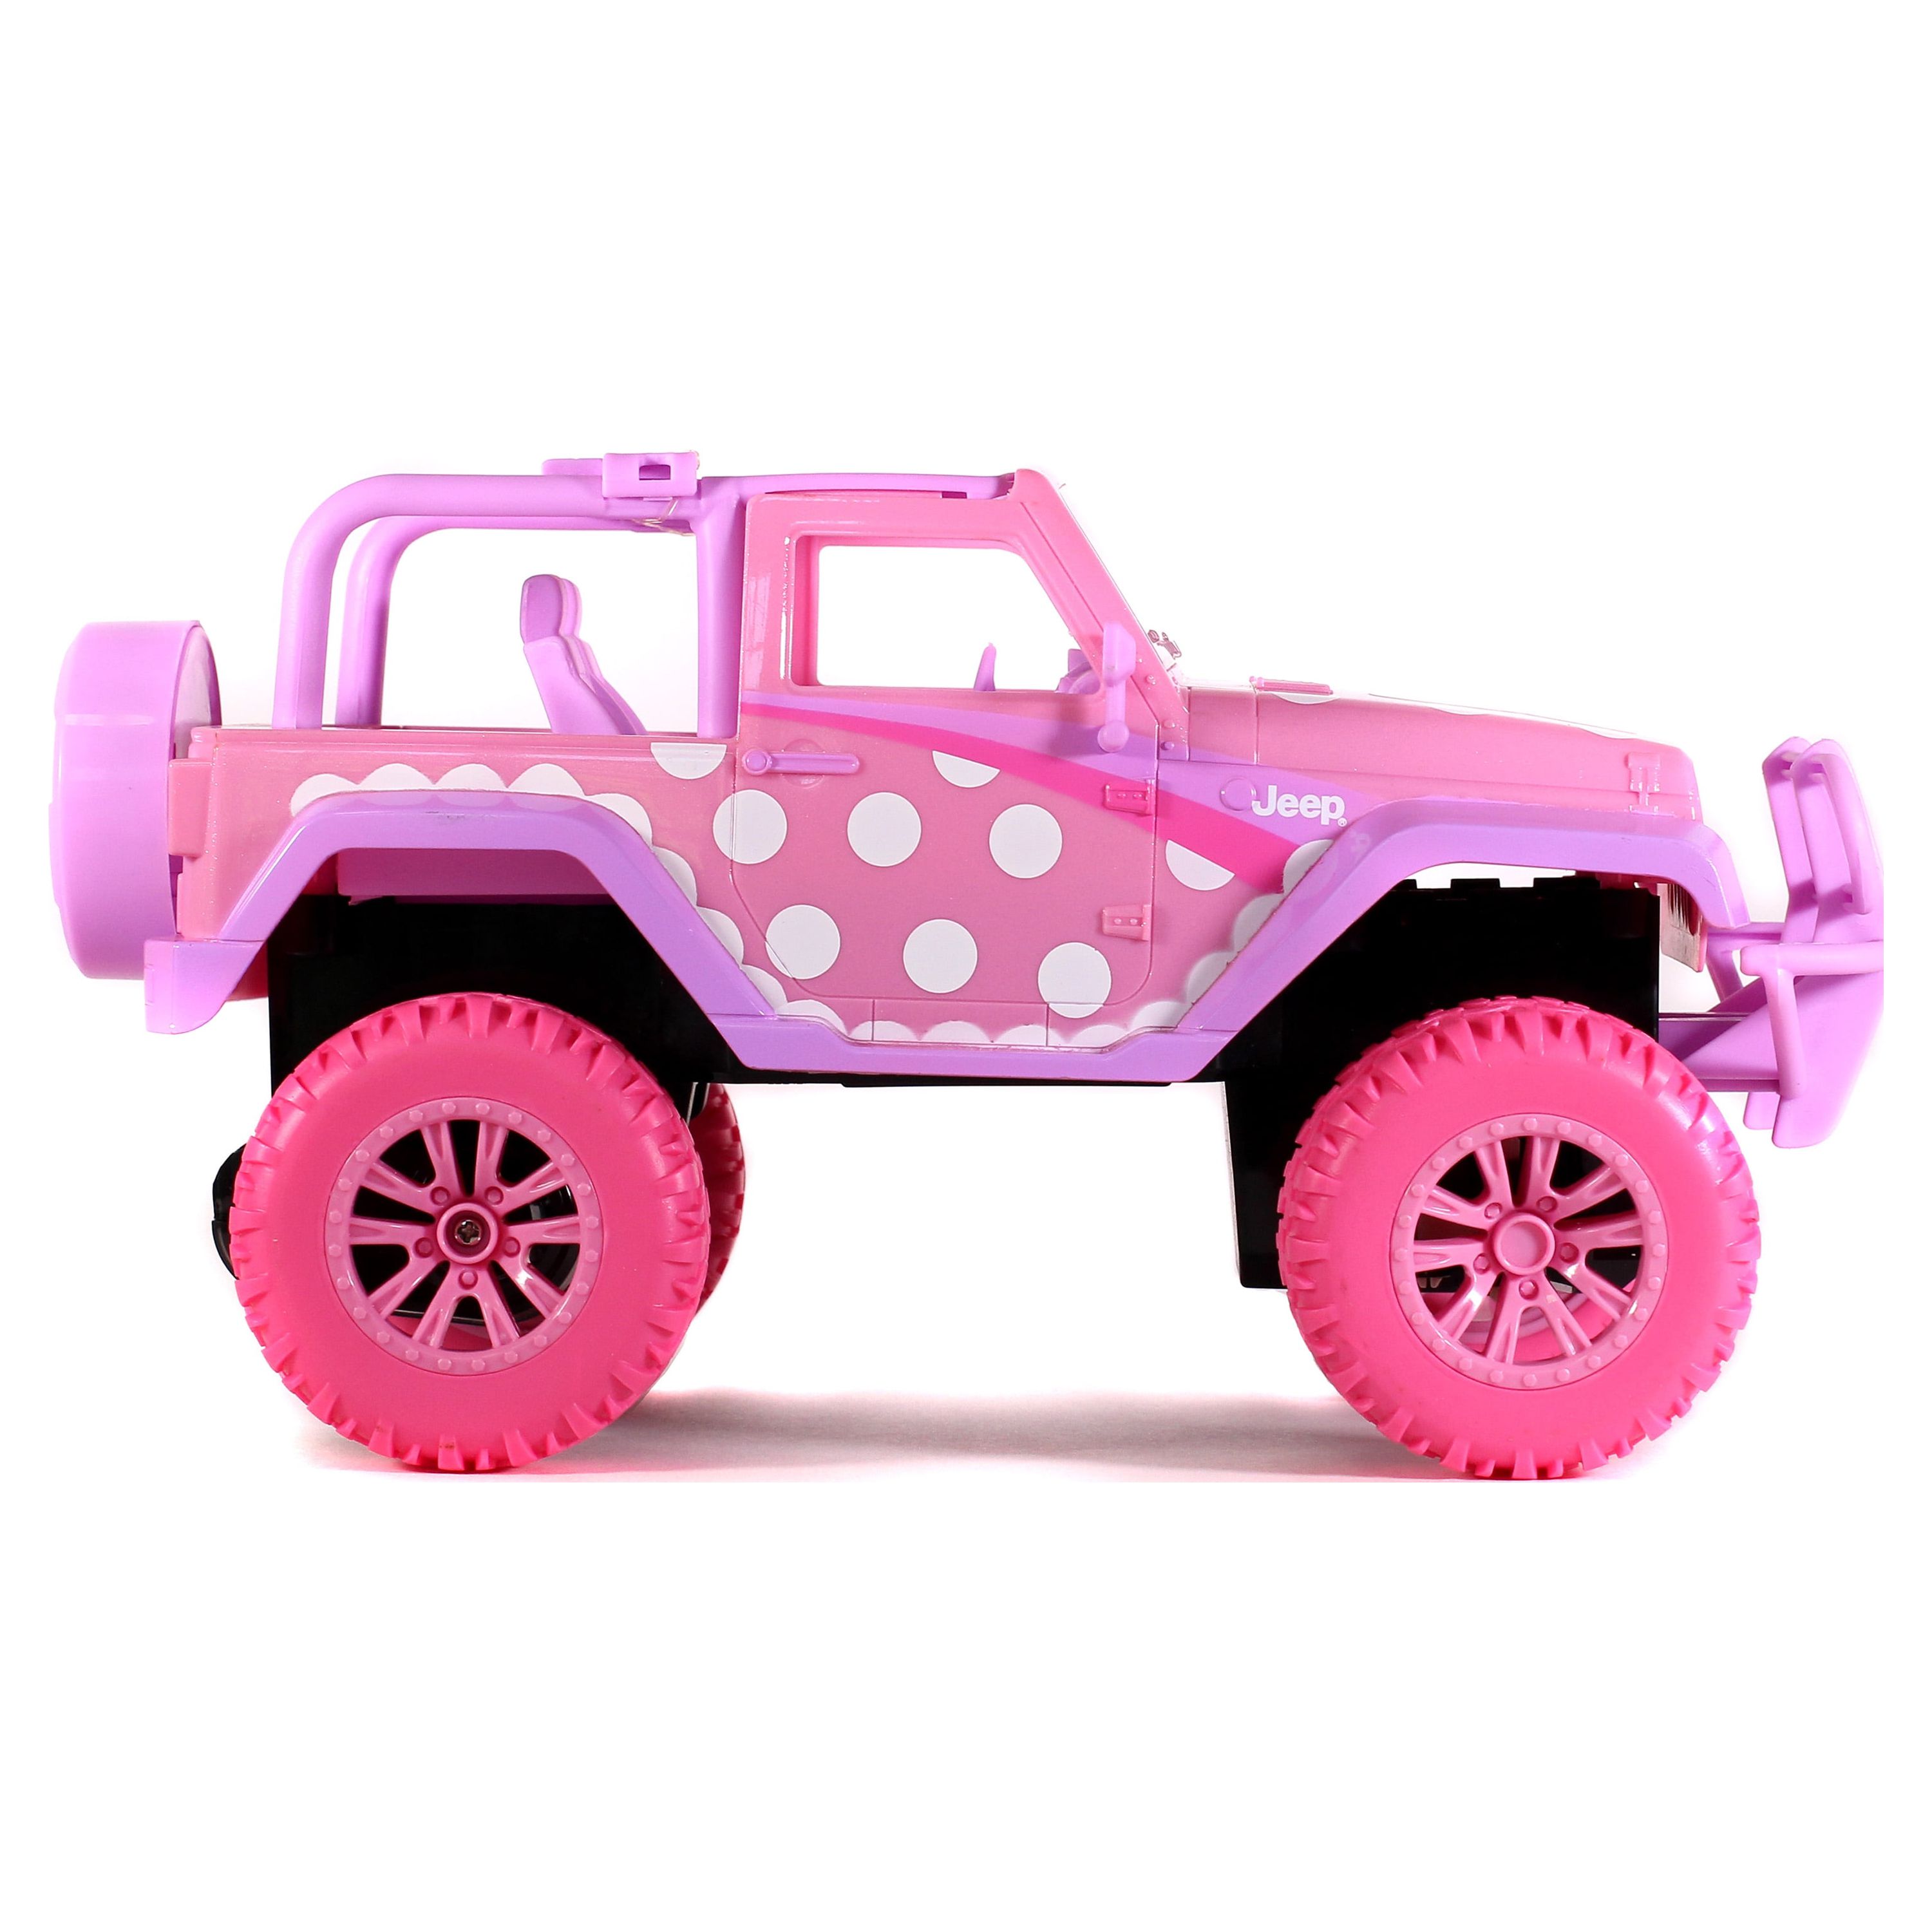 Jada Toys - Disney Minnie Mouse 1:16 Scale Jeep RC - image 4 of 6